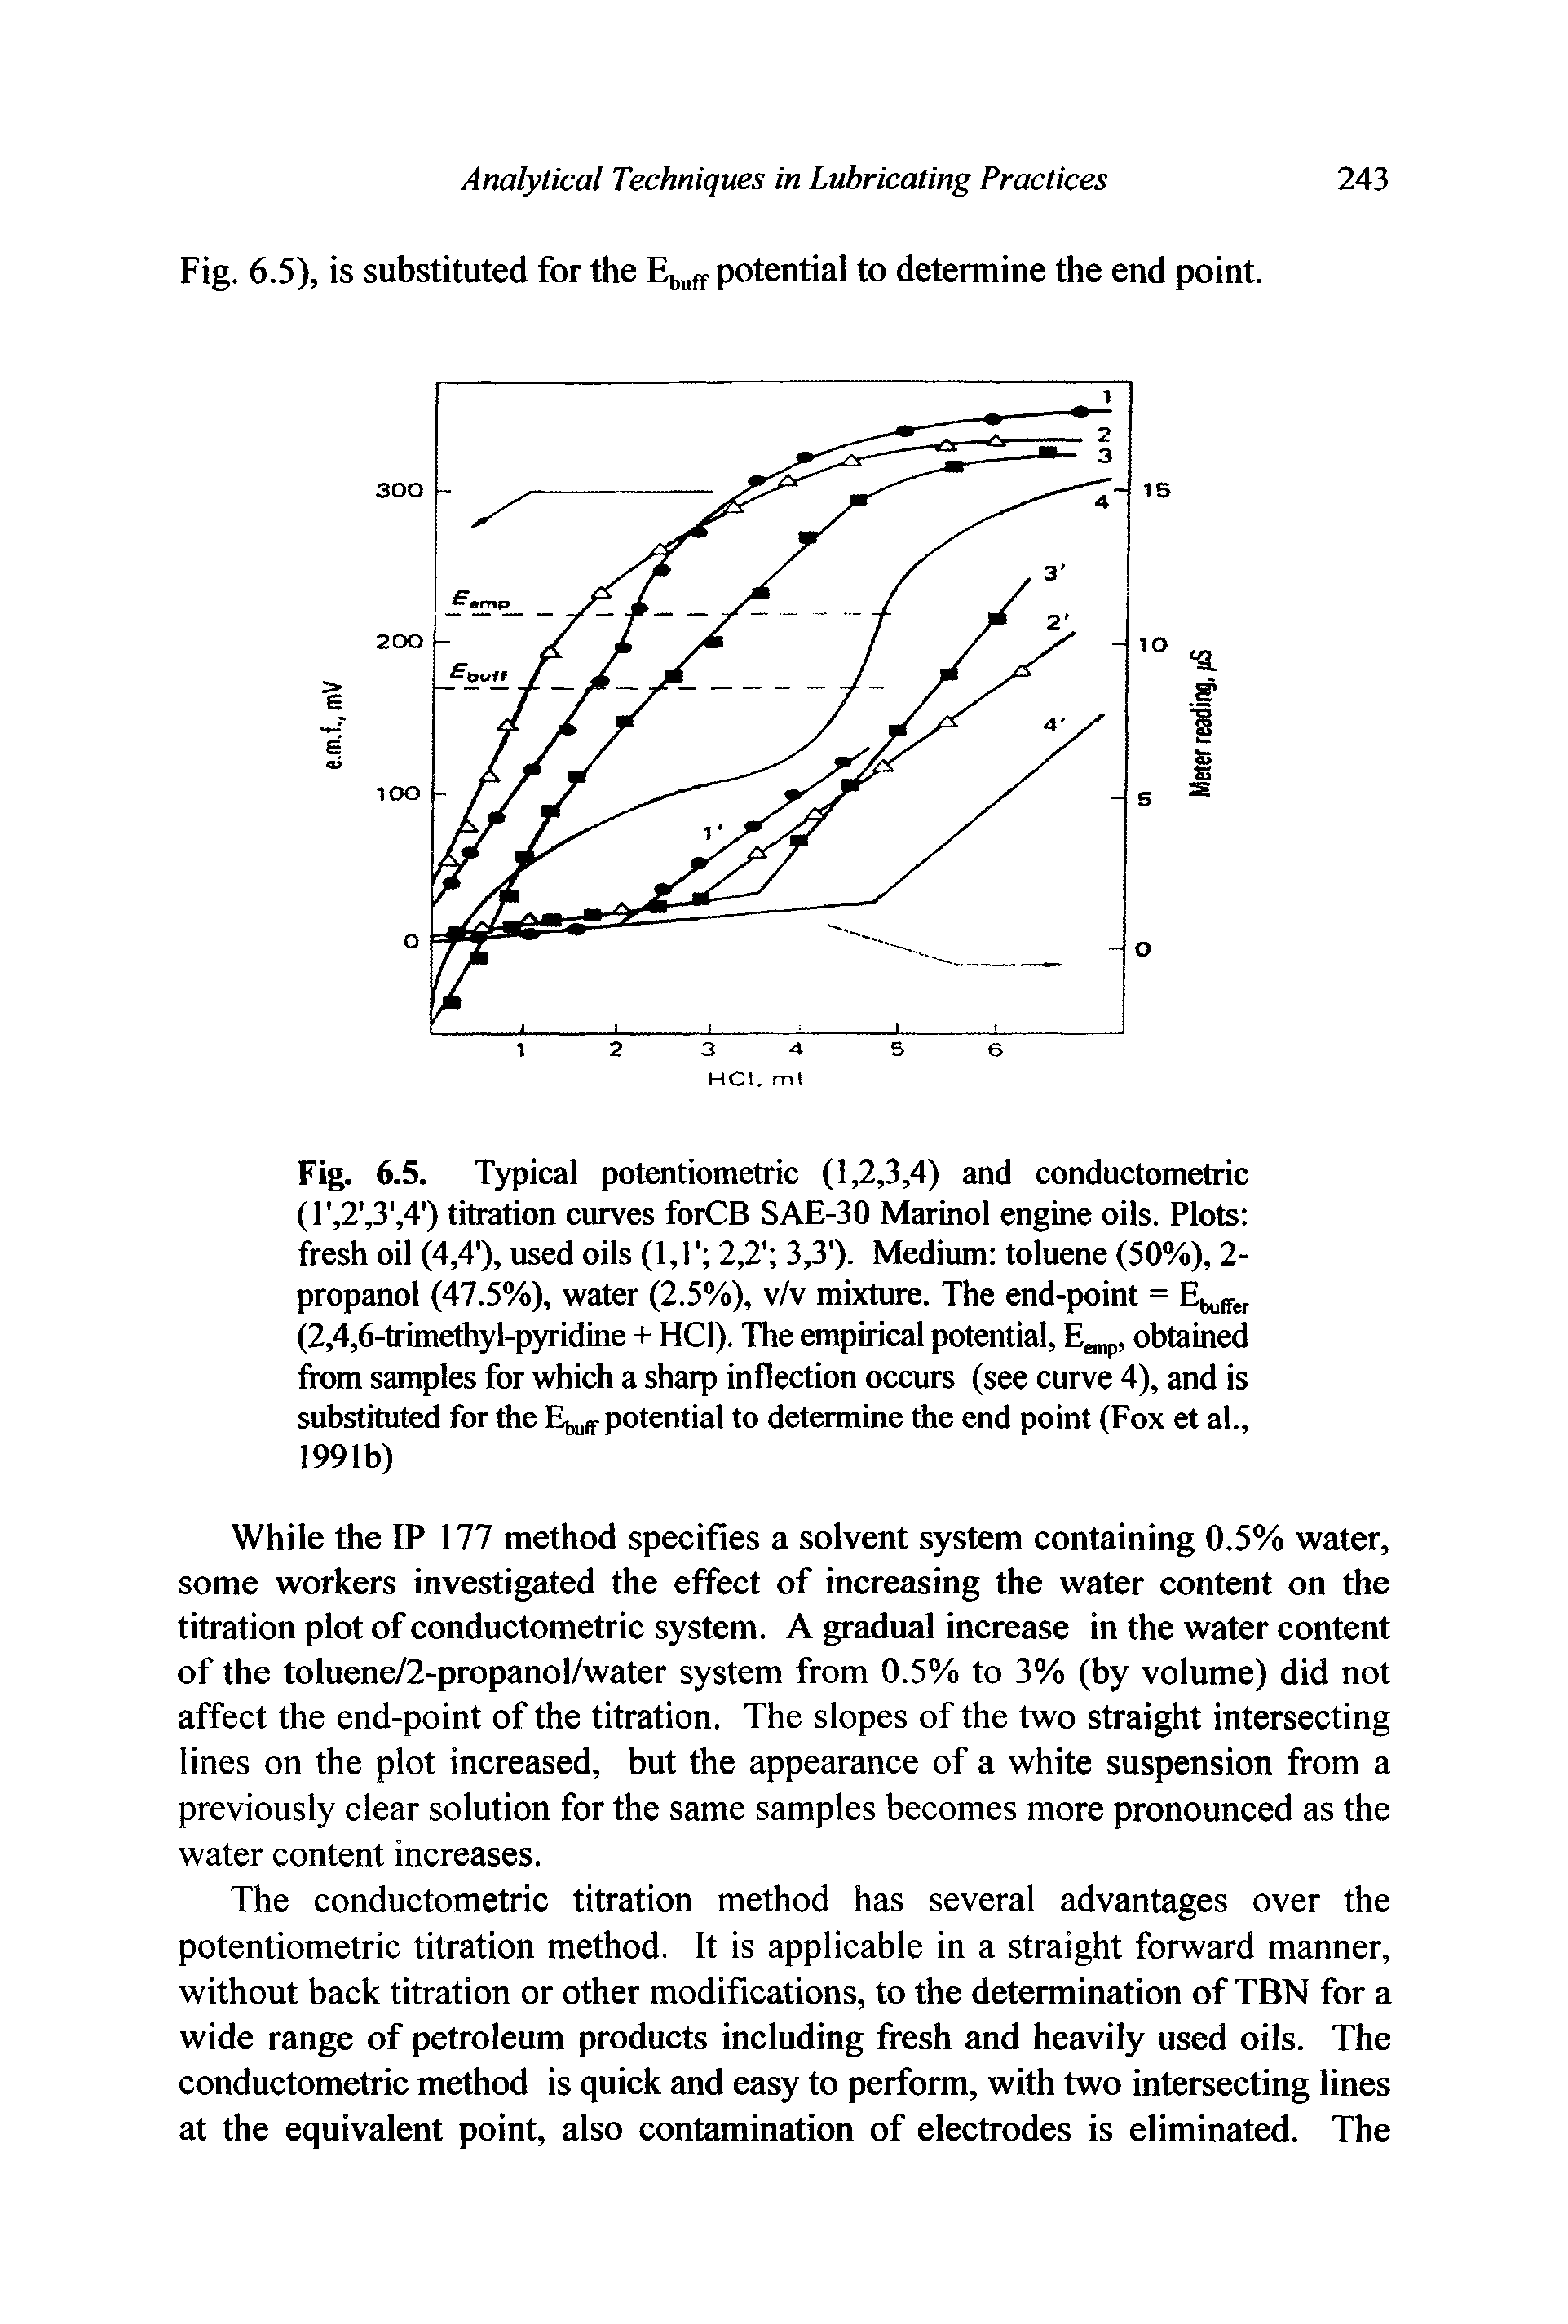 Fig. 6.5. Typical potentiometric (1,2,3,4) and conductometric (r,2, 3, 4 ) titration curves forCB SAE-30 Marinol engine oils. Plots fresh oil (4,4 ), used oils (1,1 2,2 3,3 ). Medium toluene (50%), 2-propanol (47.5%), water (2.5%), v/v mixture. The end-point = (2,4,6-trimethyl-pyridine + HC1). The empirical potential, E, obtained from samples for which a sharp inflection occurs (see curve 4), and is substituted for the potential to determine the end point (Fox et al.,...